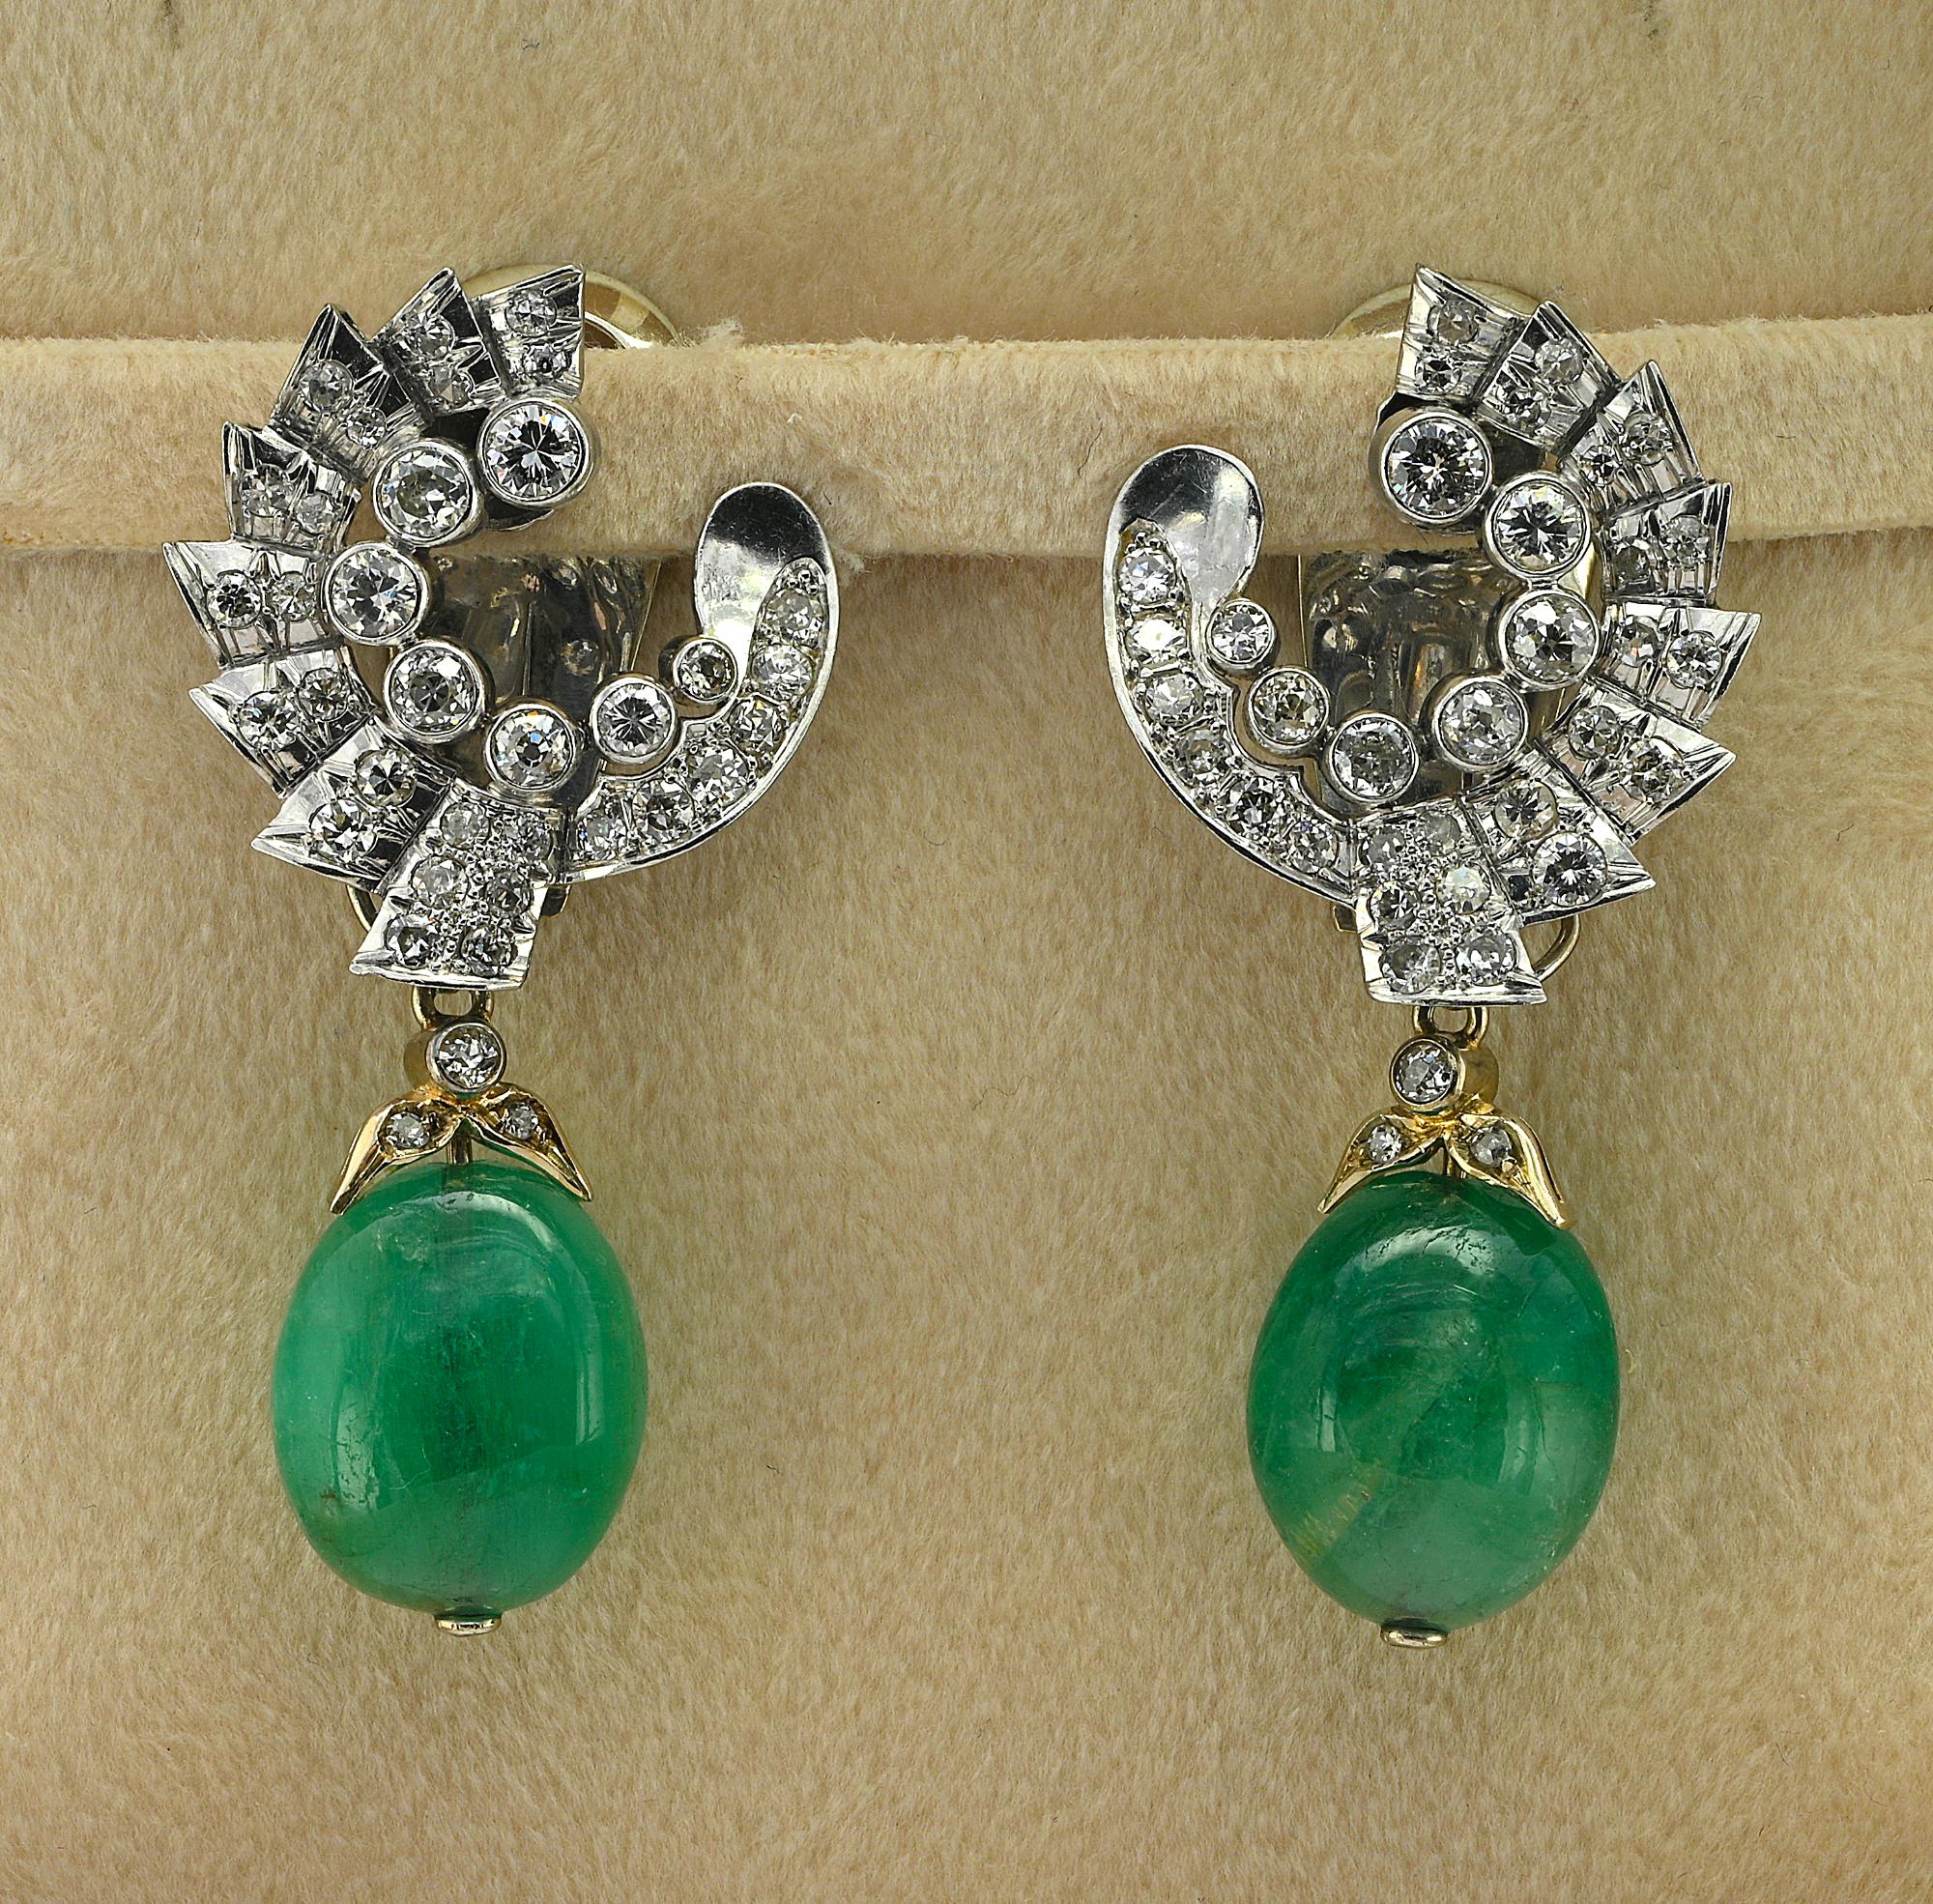 Marvelous pair of Art Deco earrings constructed in night day version, 1930 circa – Signed Umberto Fontana Italy - Rome
Fascinating design of the era with an impressive Diamond top finely hand crafted surmounted by 3.20 Ct Of Diamonds assessed G/H